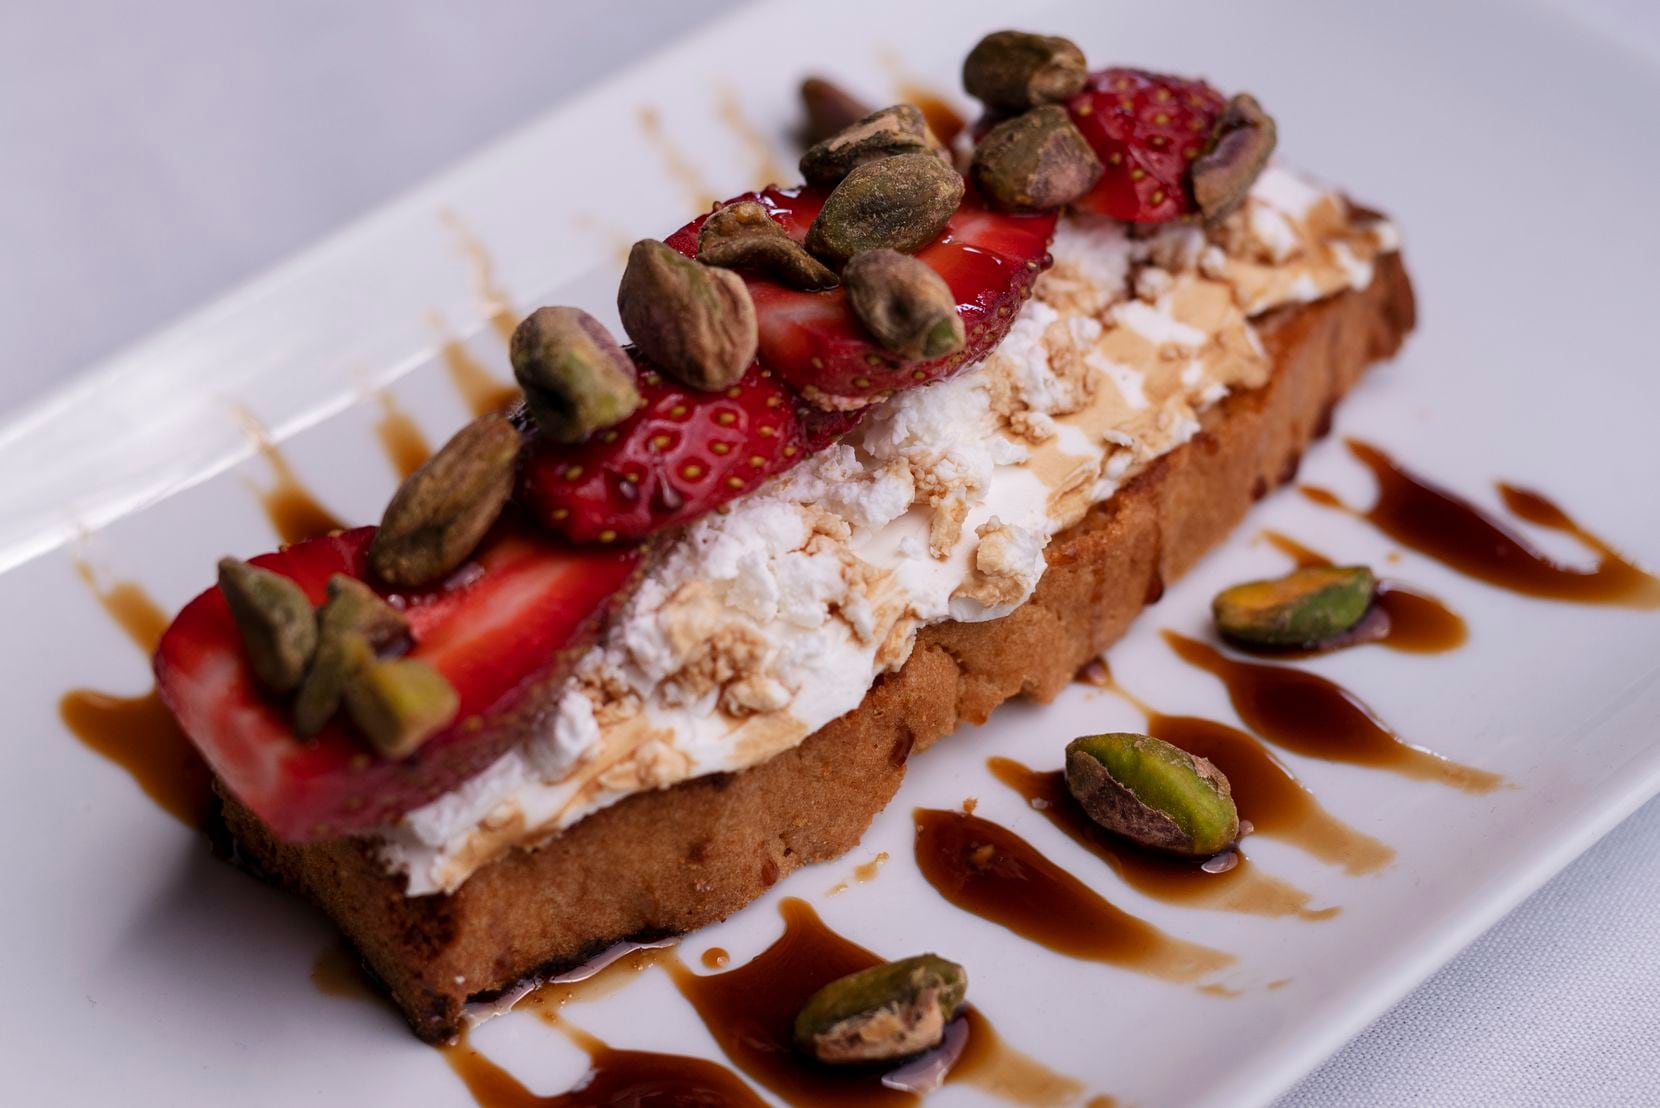 A dessert dish of housemade Kefir, Bulgarian feta, strawberries, tea rusk and roasted pistachios is offered as part of the Christmas menu at Gorji Restaurant.